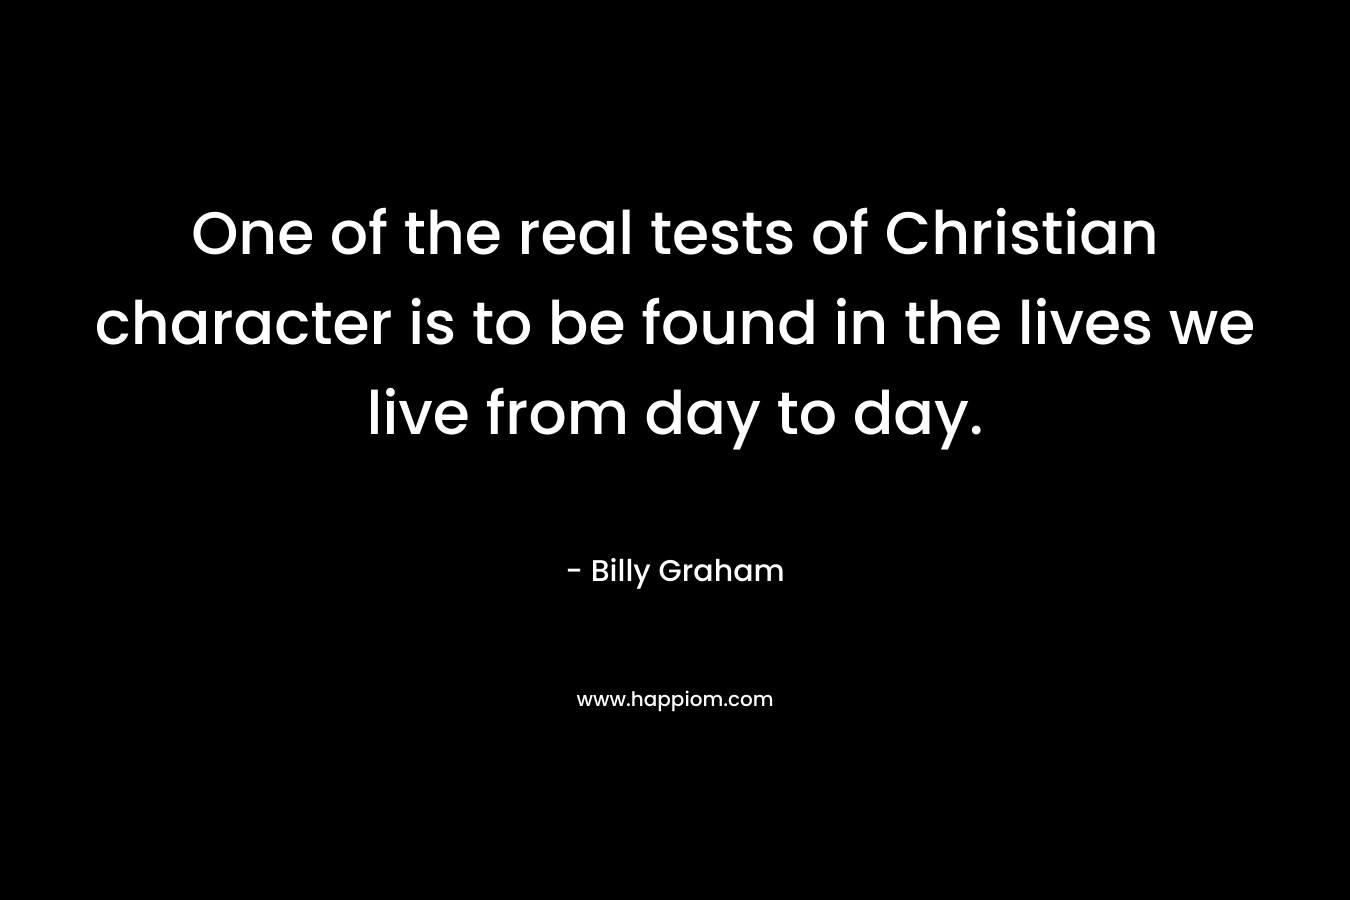 One of the real tests of Christian character is to be found in the lives we live from day to day.